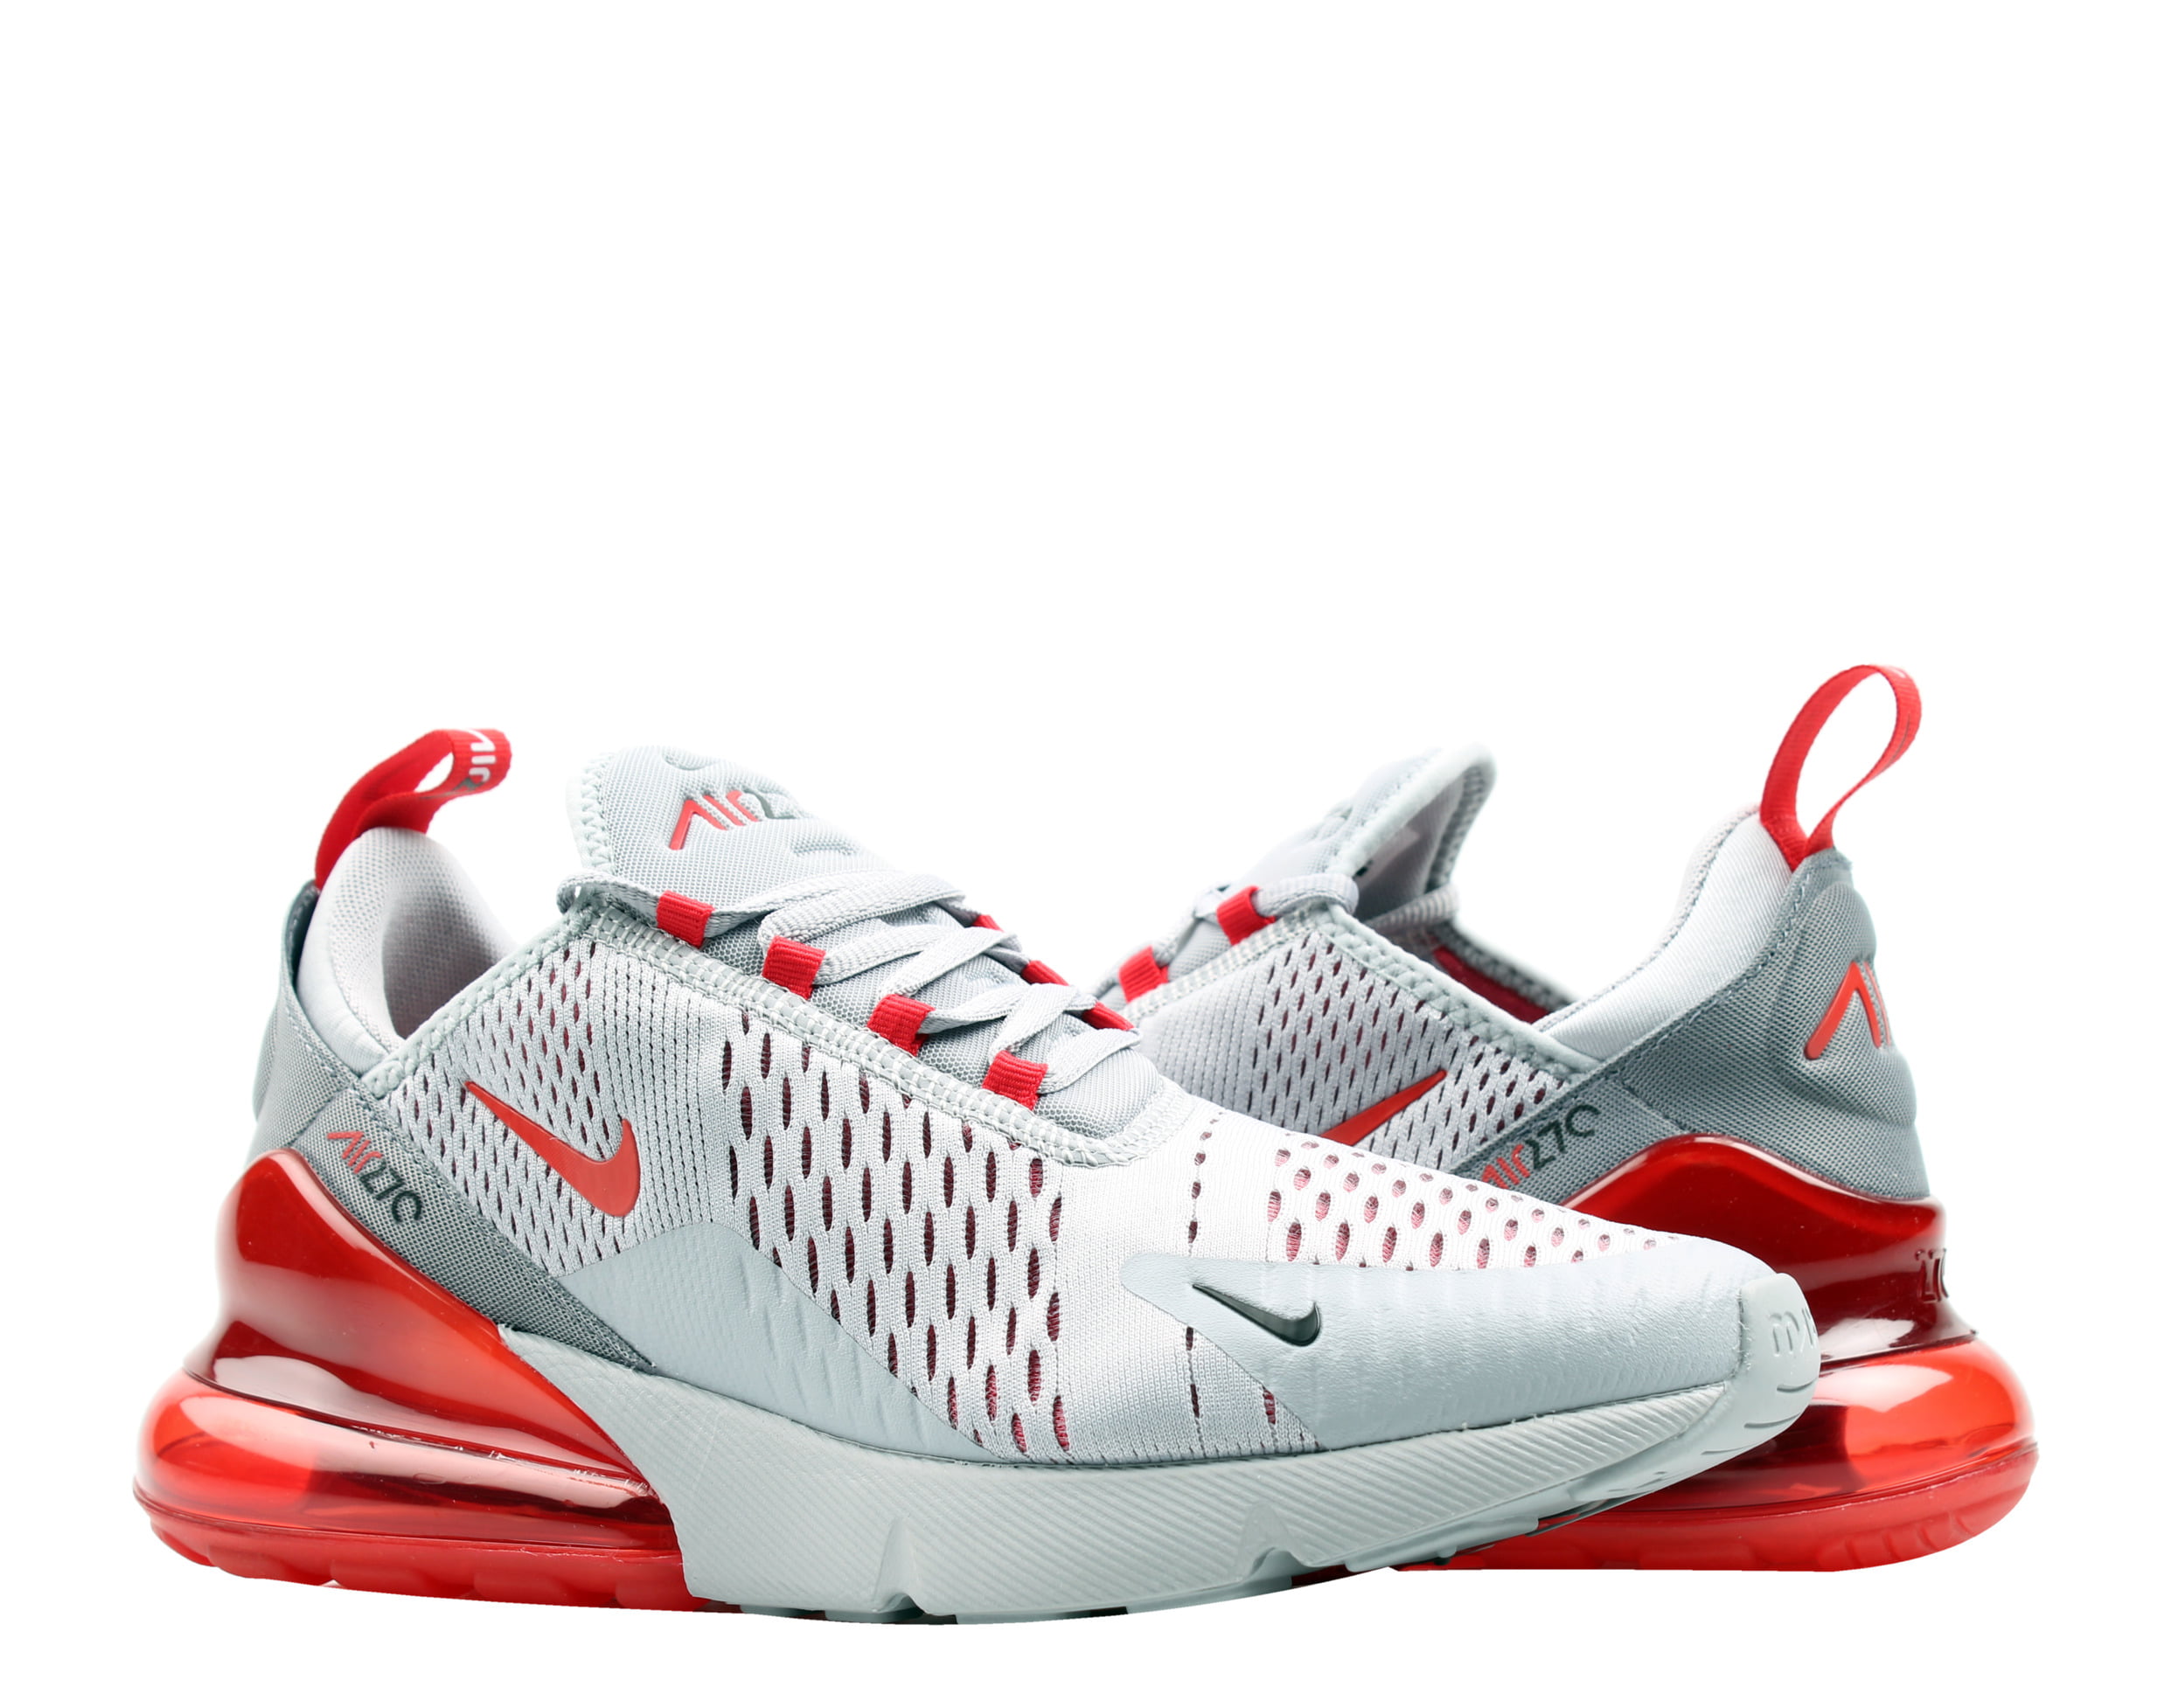 nike air max 270 wolf grey red